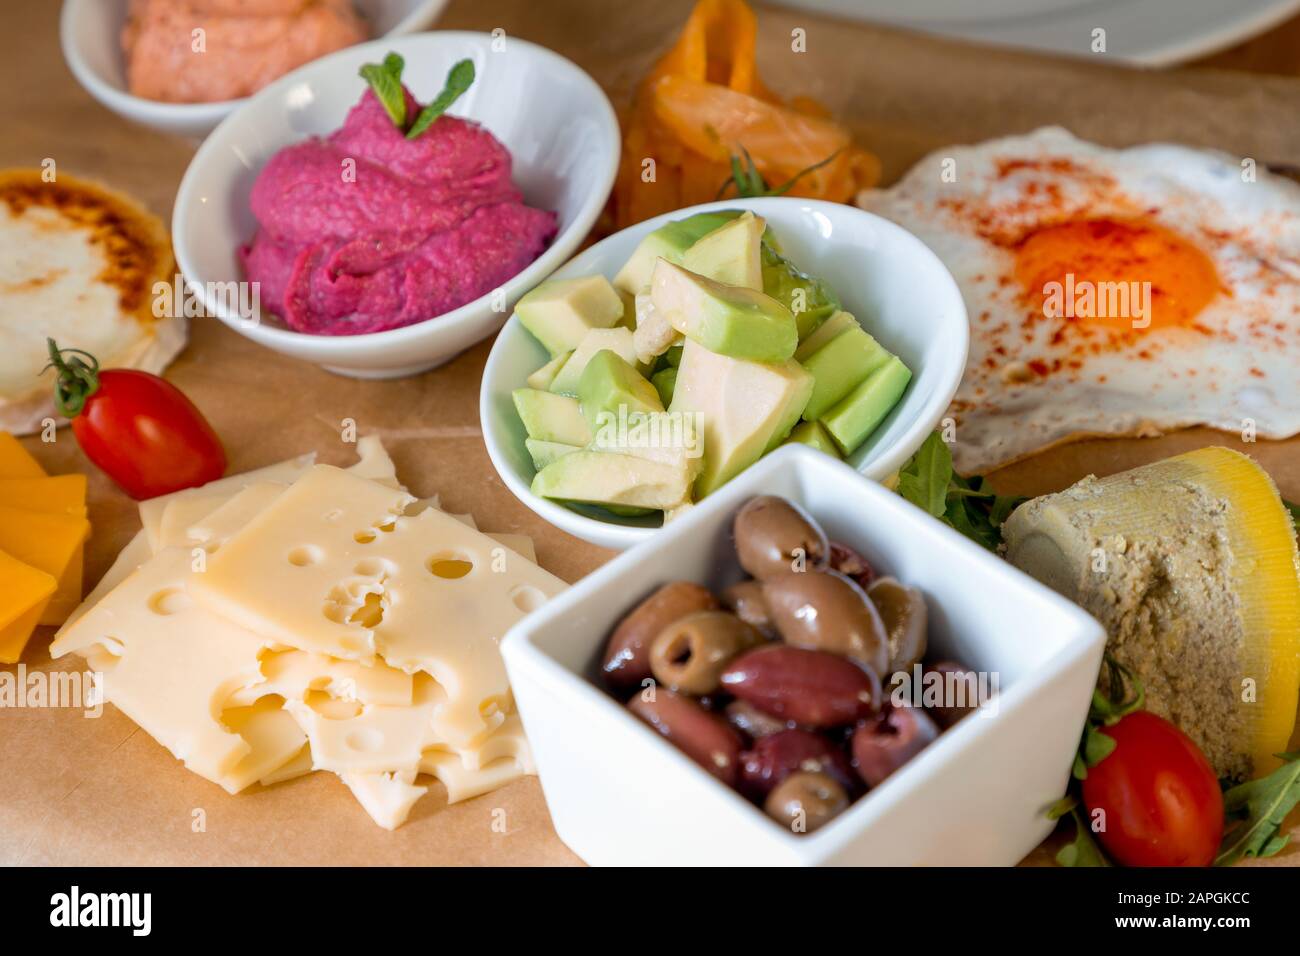 Restaurant table with variety of foods and beverages. Stock Photo